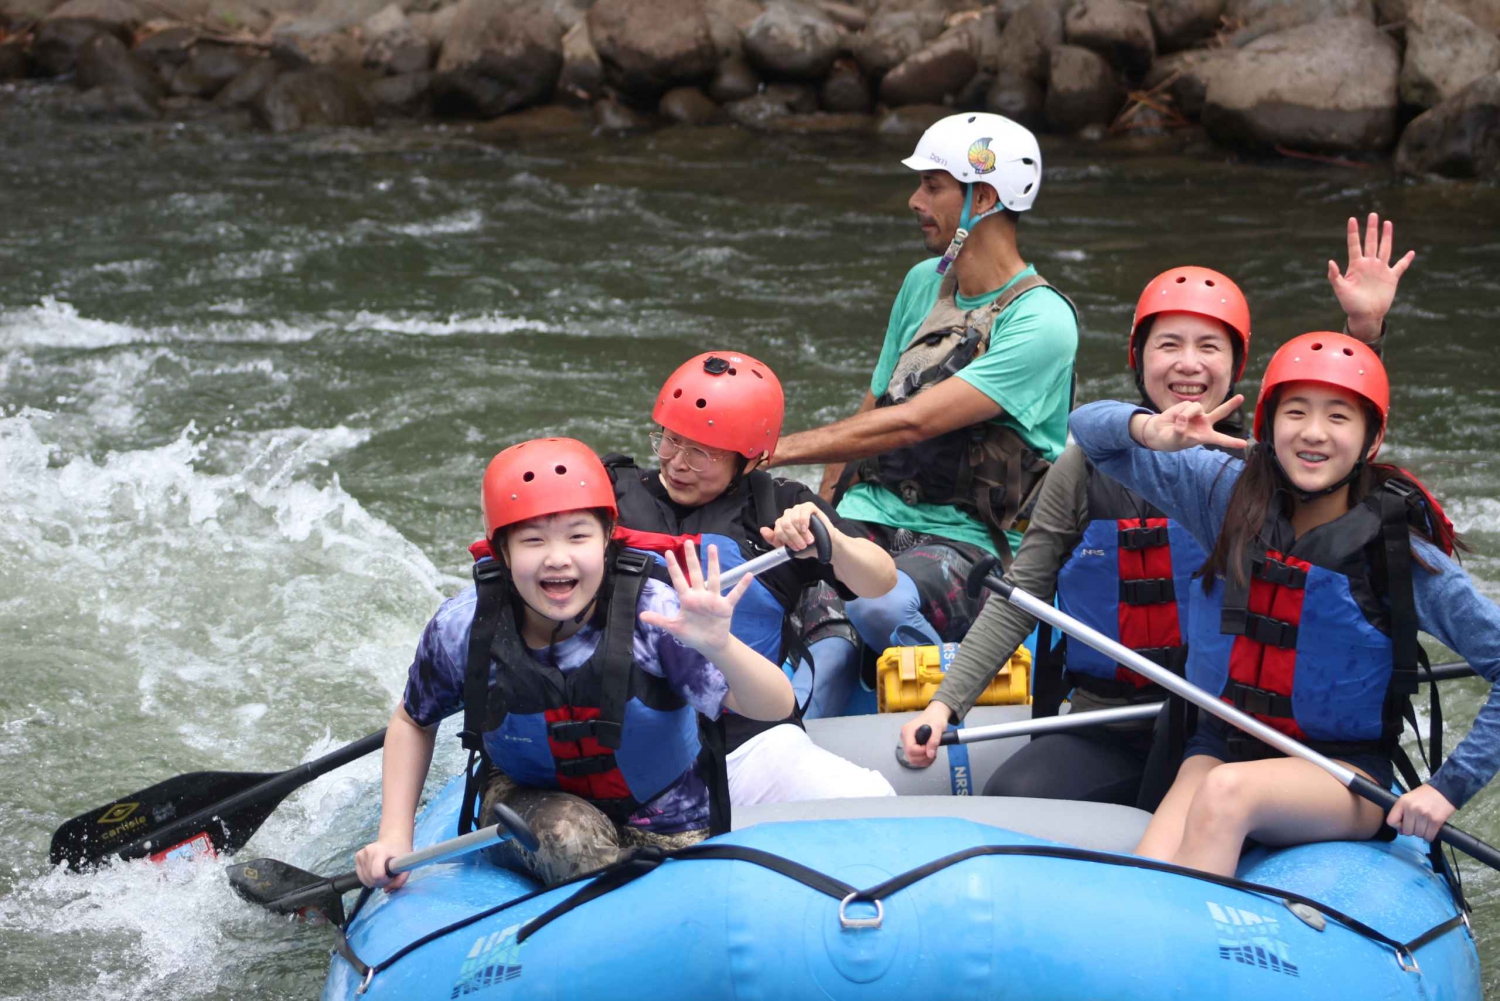 La Fortuna: River Rafting Tour with Lunch and Transfer